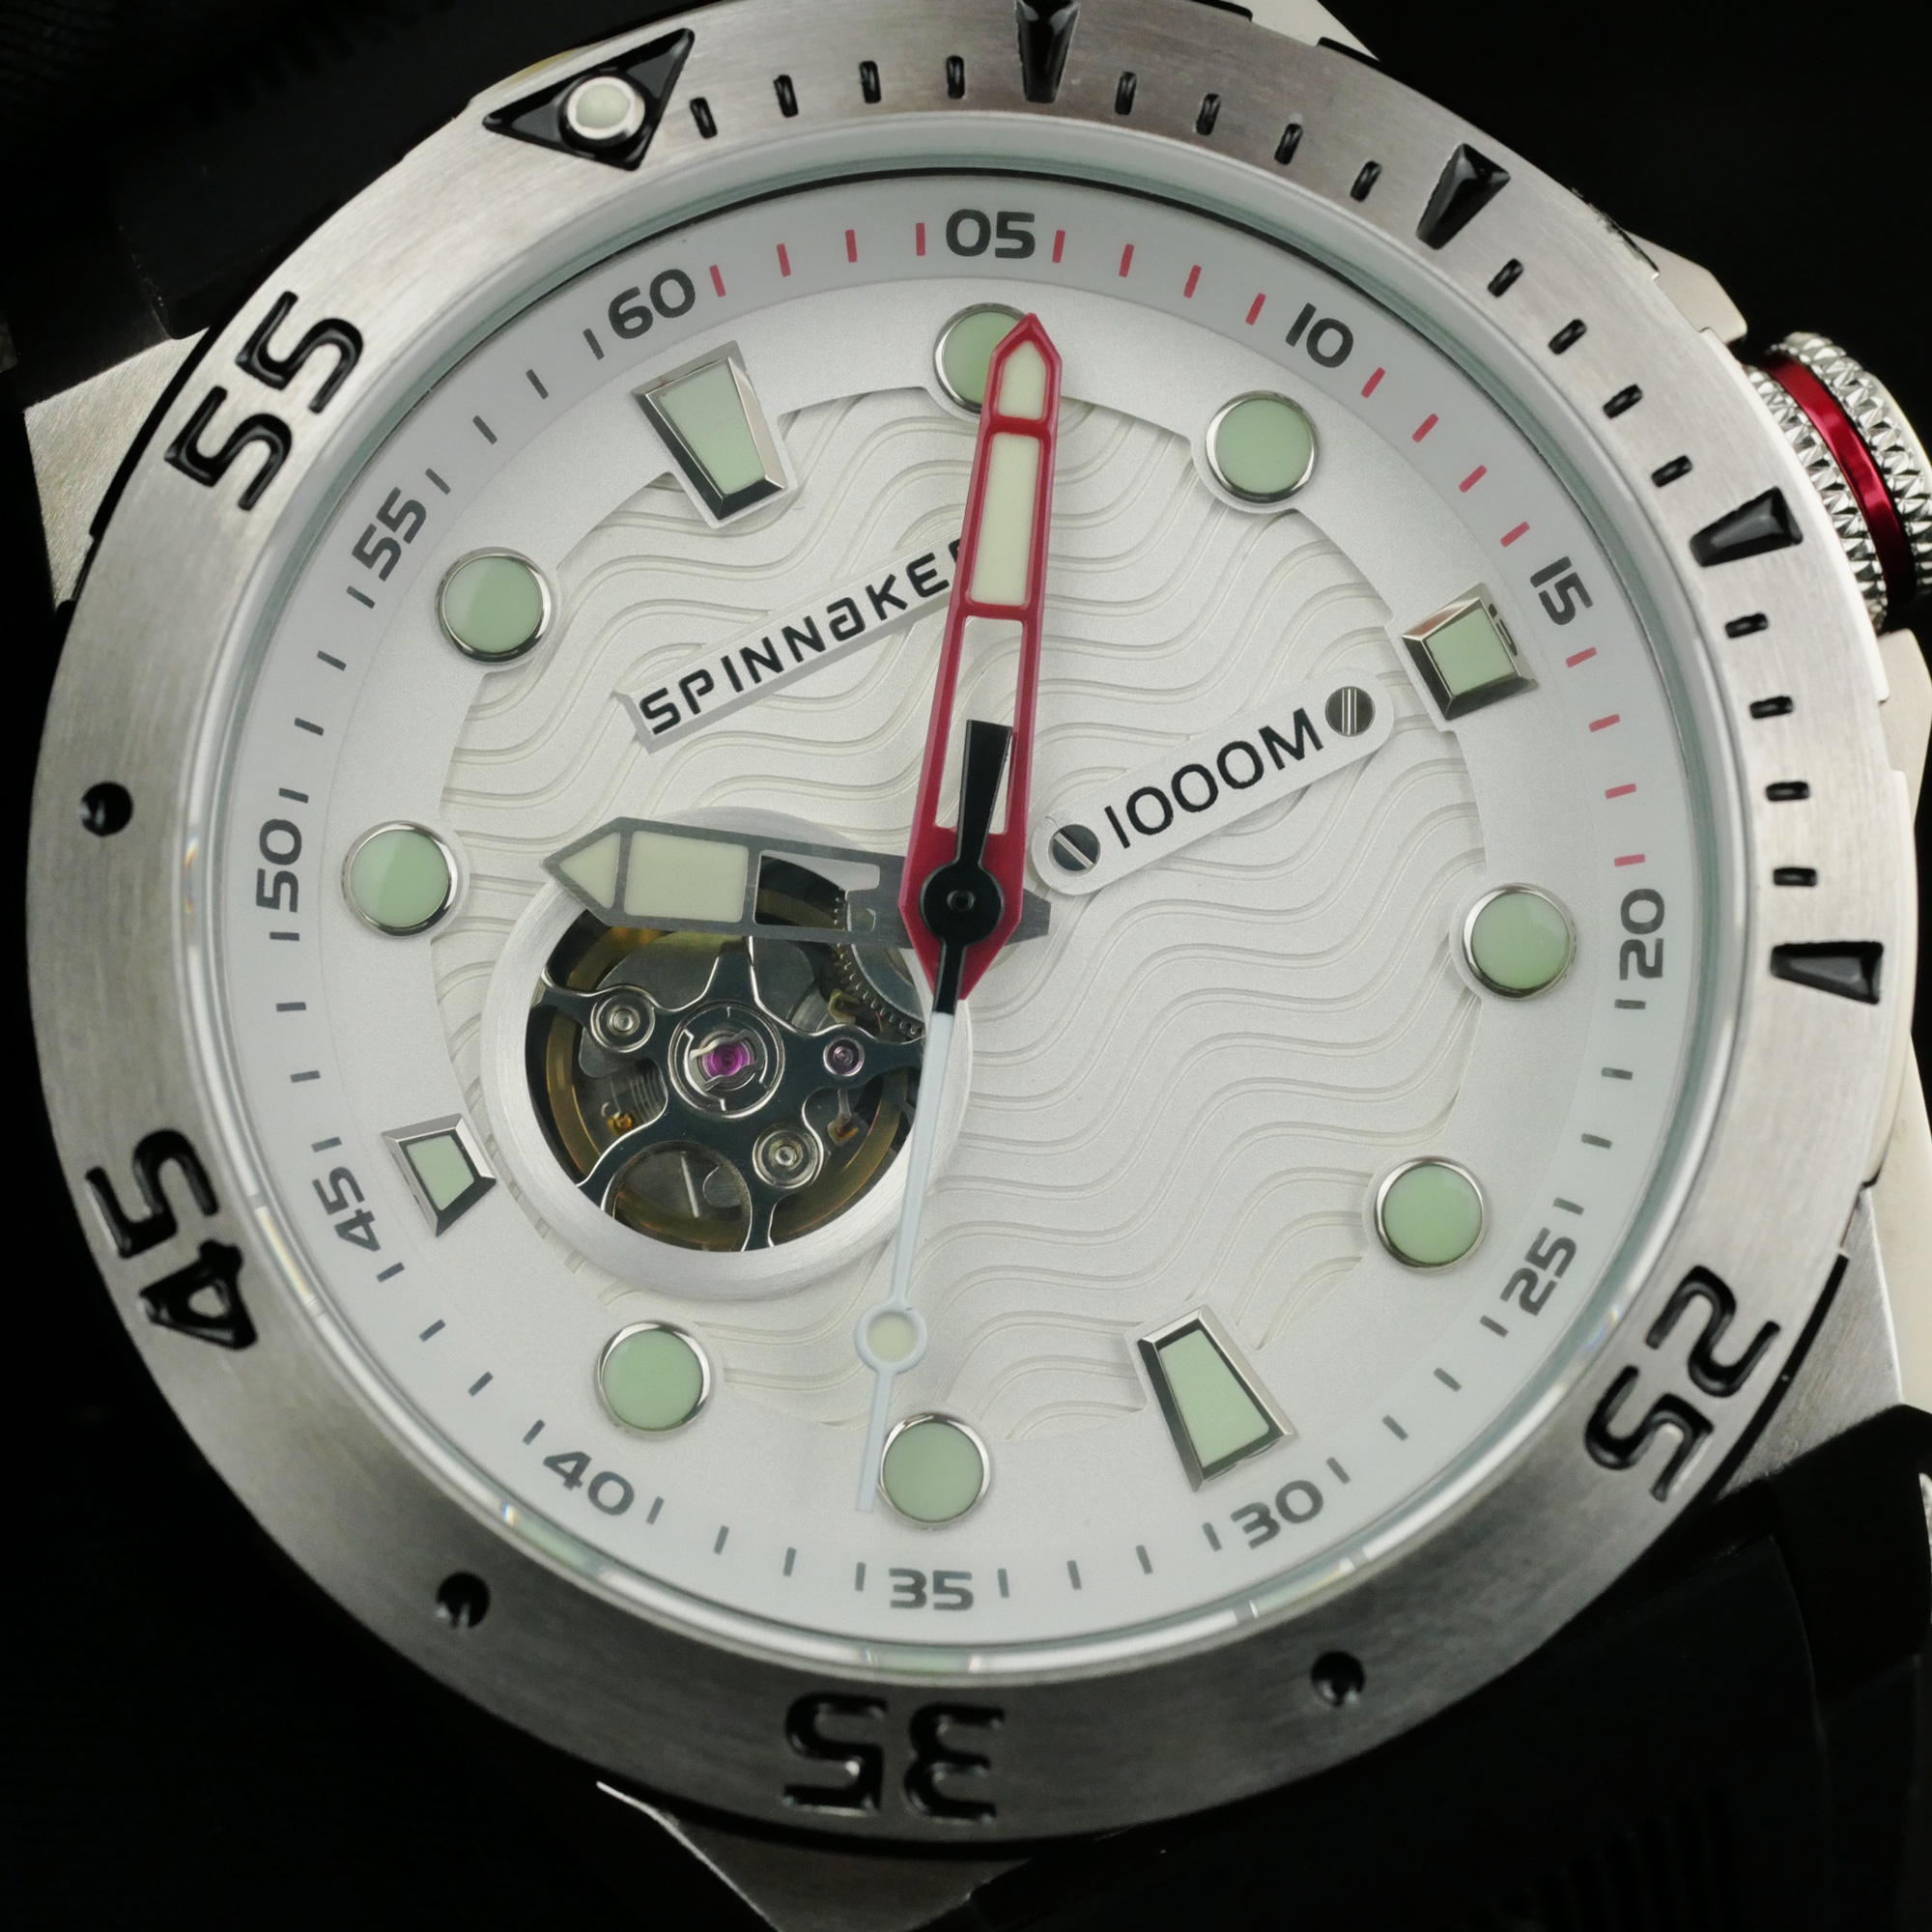 Spinnaker Overboard 1000M Automatic Diver Watch Open Heart Dial/Silver Bezel WR1000M SP-5023-0D